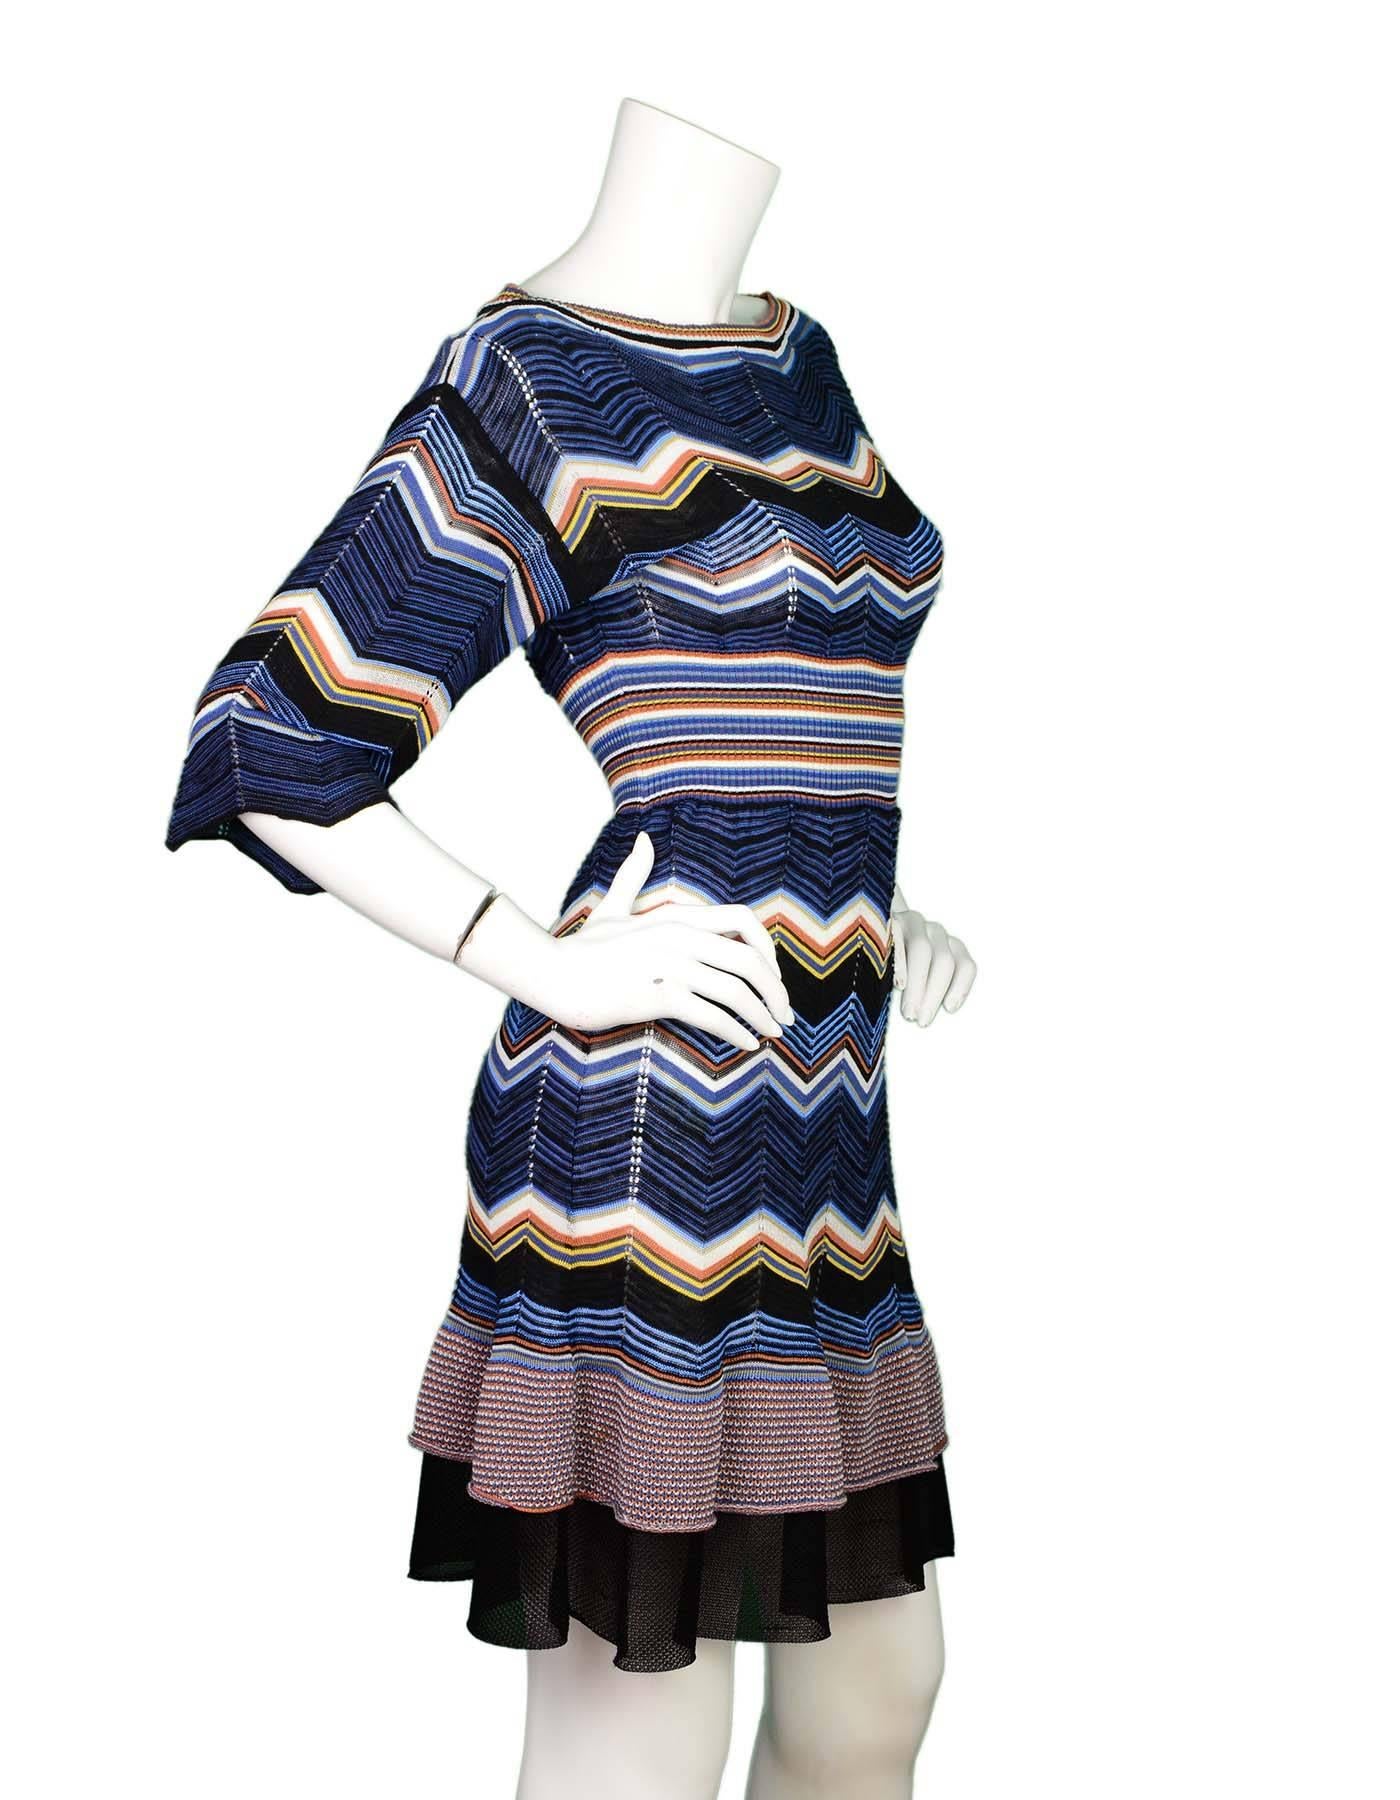 Missoni Blue & Orange ZigZag Knit Dress 
Features jagged 3/4 length sleeves

Made In: Italy
Color: Navy, blue, black, orange, yellow, and white
Composition: 55% cotton, 41% viscose, 3% flax, 1% polyamide
Lining: 100%